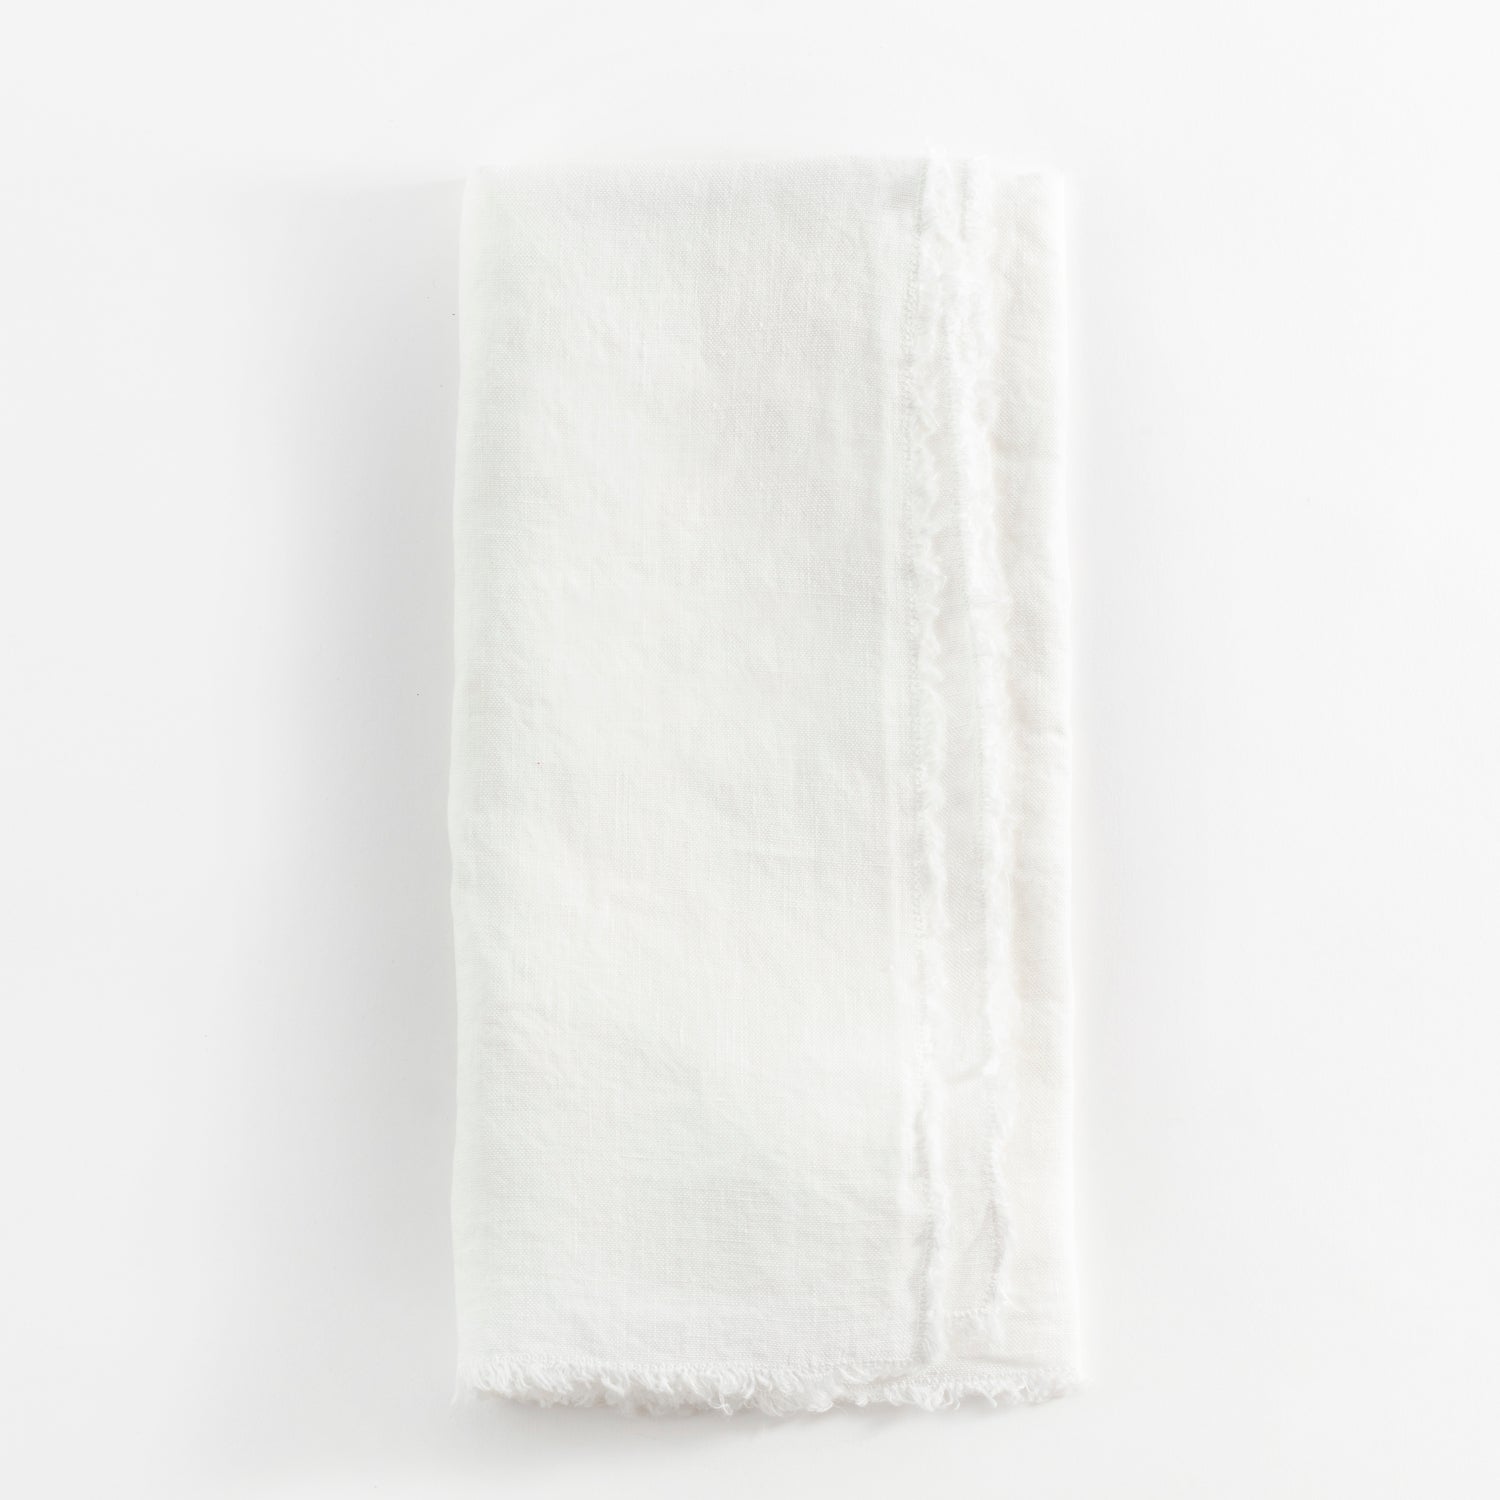 Soft, textured white fabric with a casual, frayed edge.